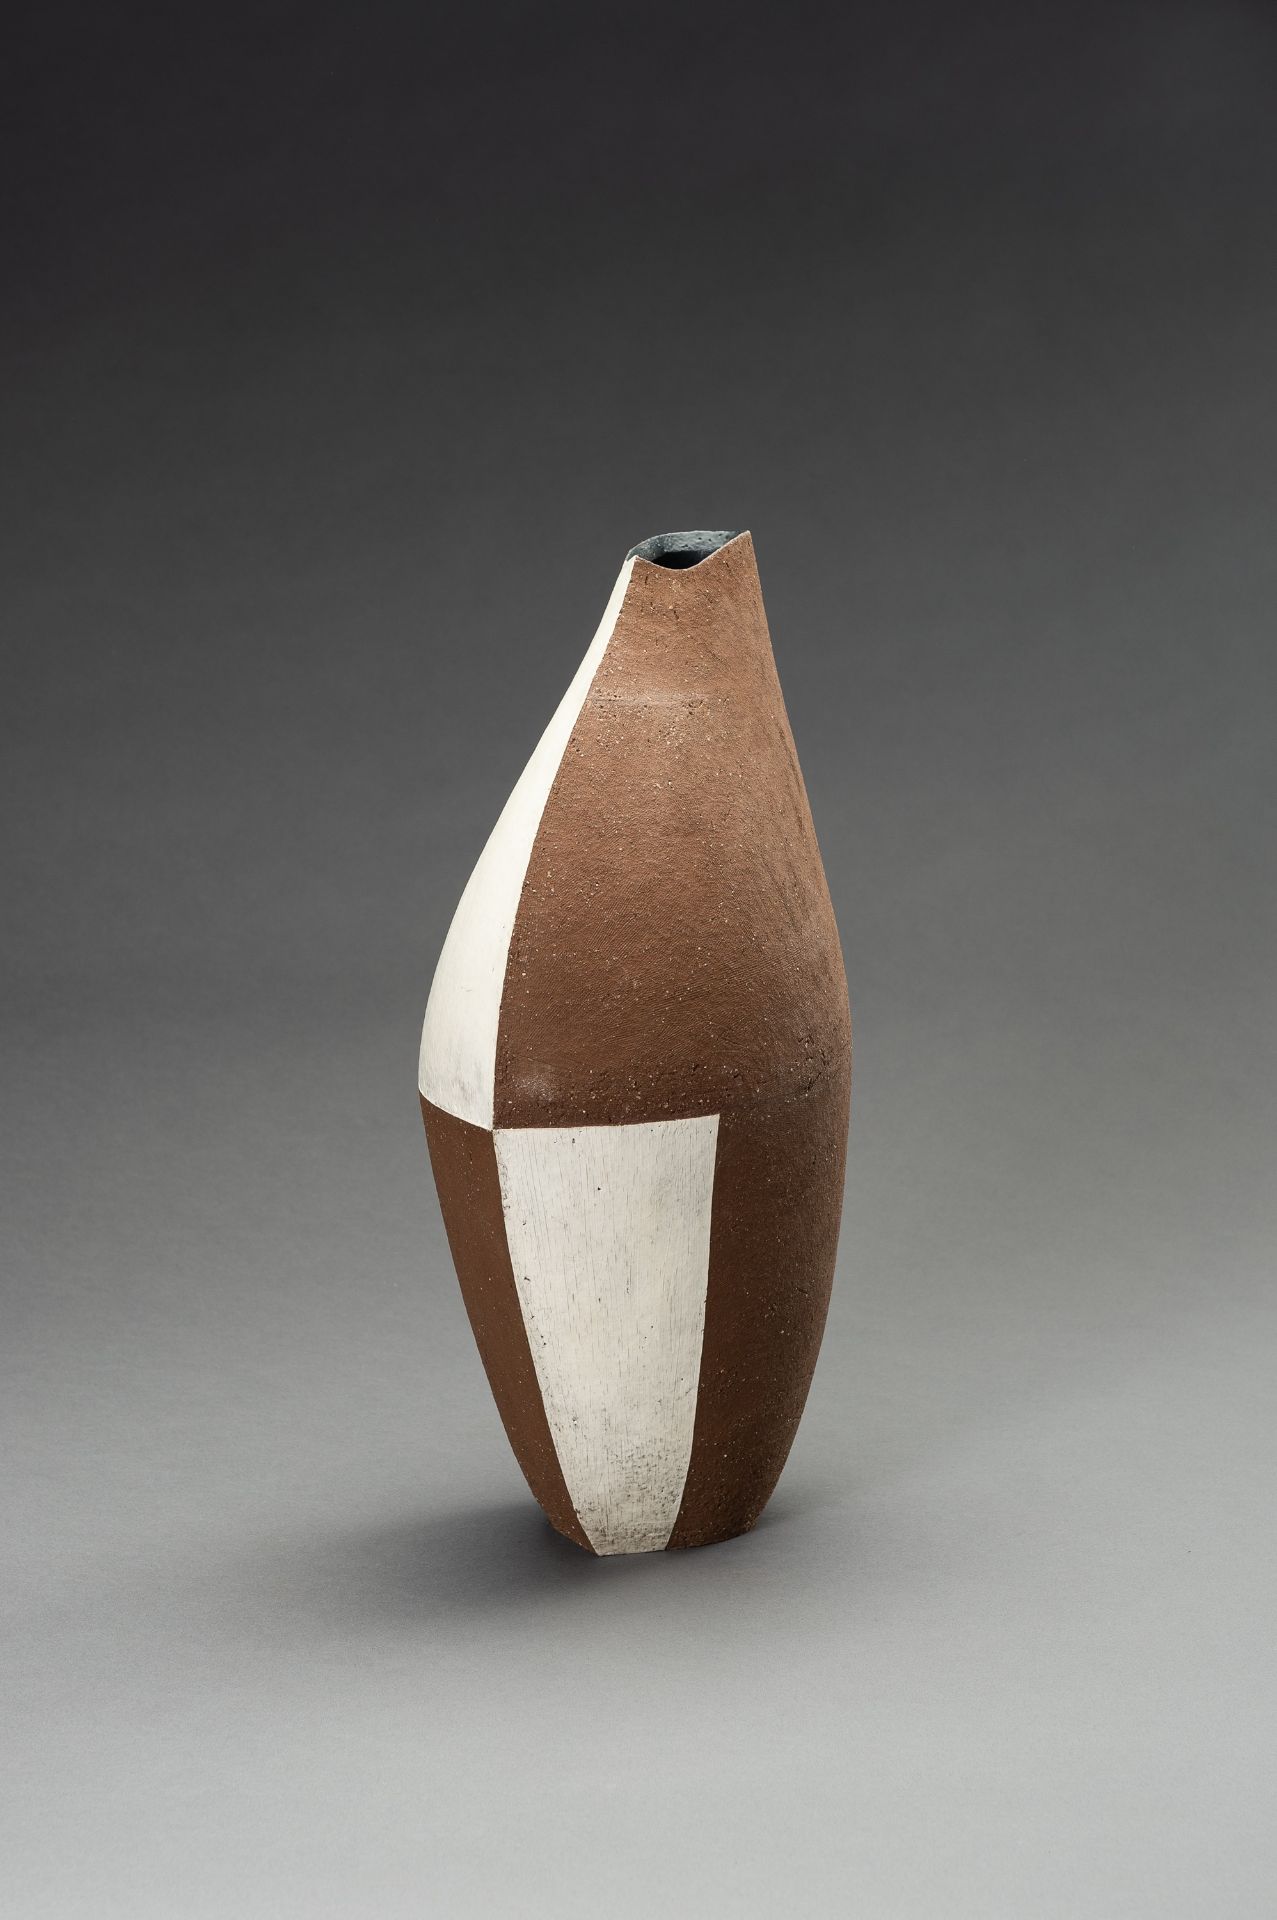 MASA TOSHI: A CONTEMPORARY LACQUERED CERAMIC VASE - Image 2 of 11